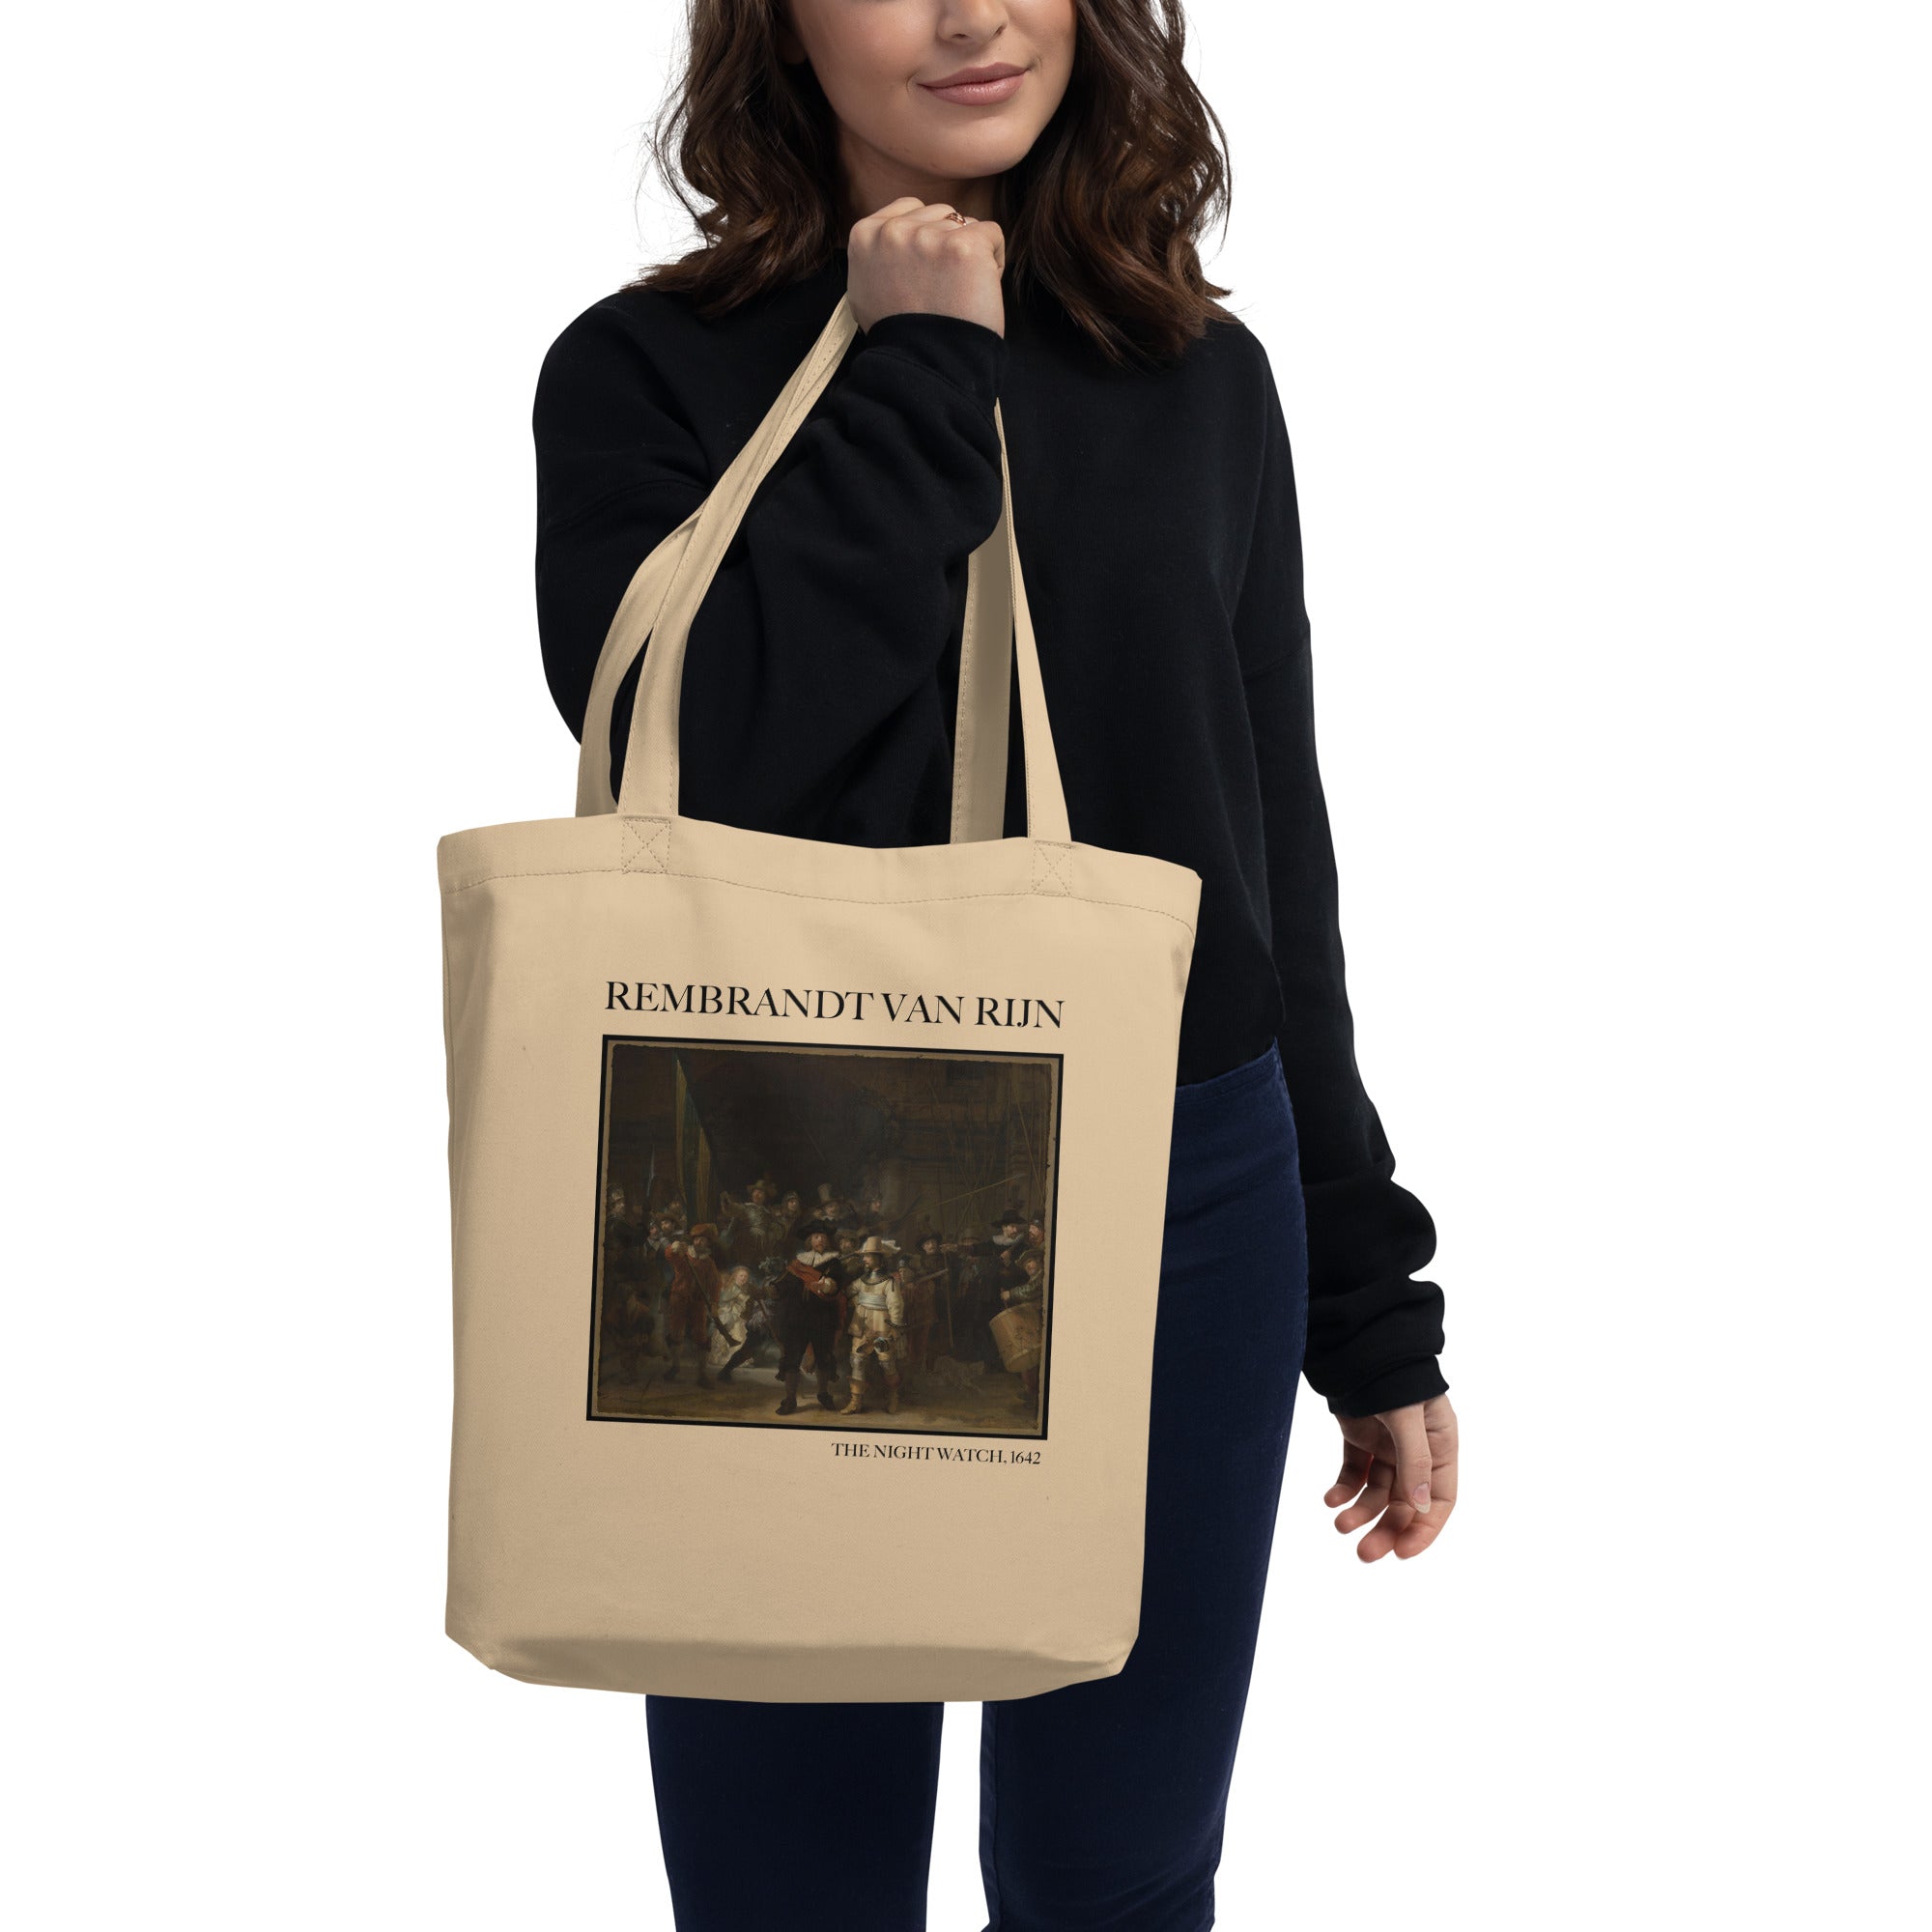 Rembrandt van Rijn 'The Night Watch' Famous Painting Totebag | Eco Friendly Art Tote Bag